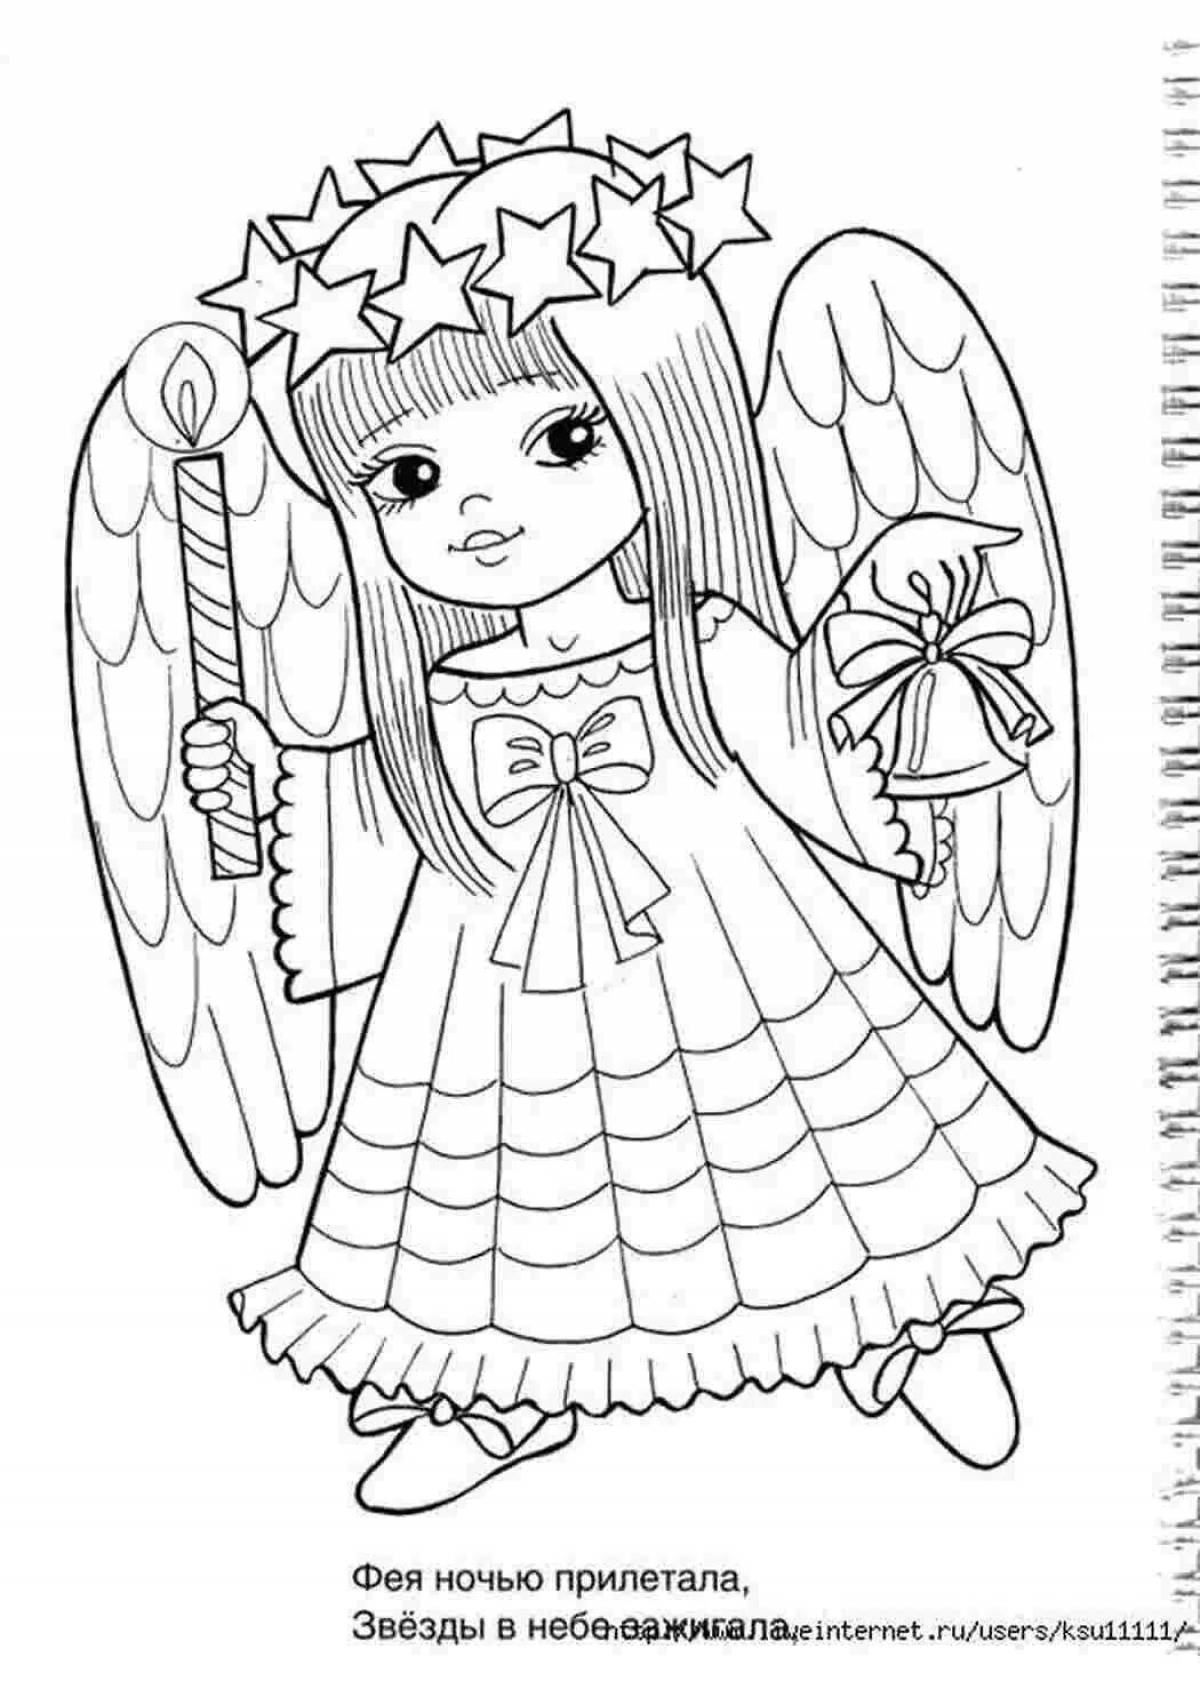 Animated Christmas coloring book for girls 10 years old